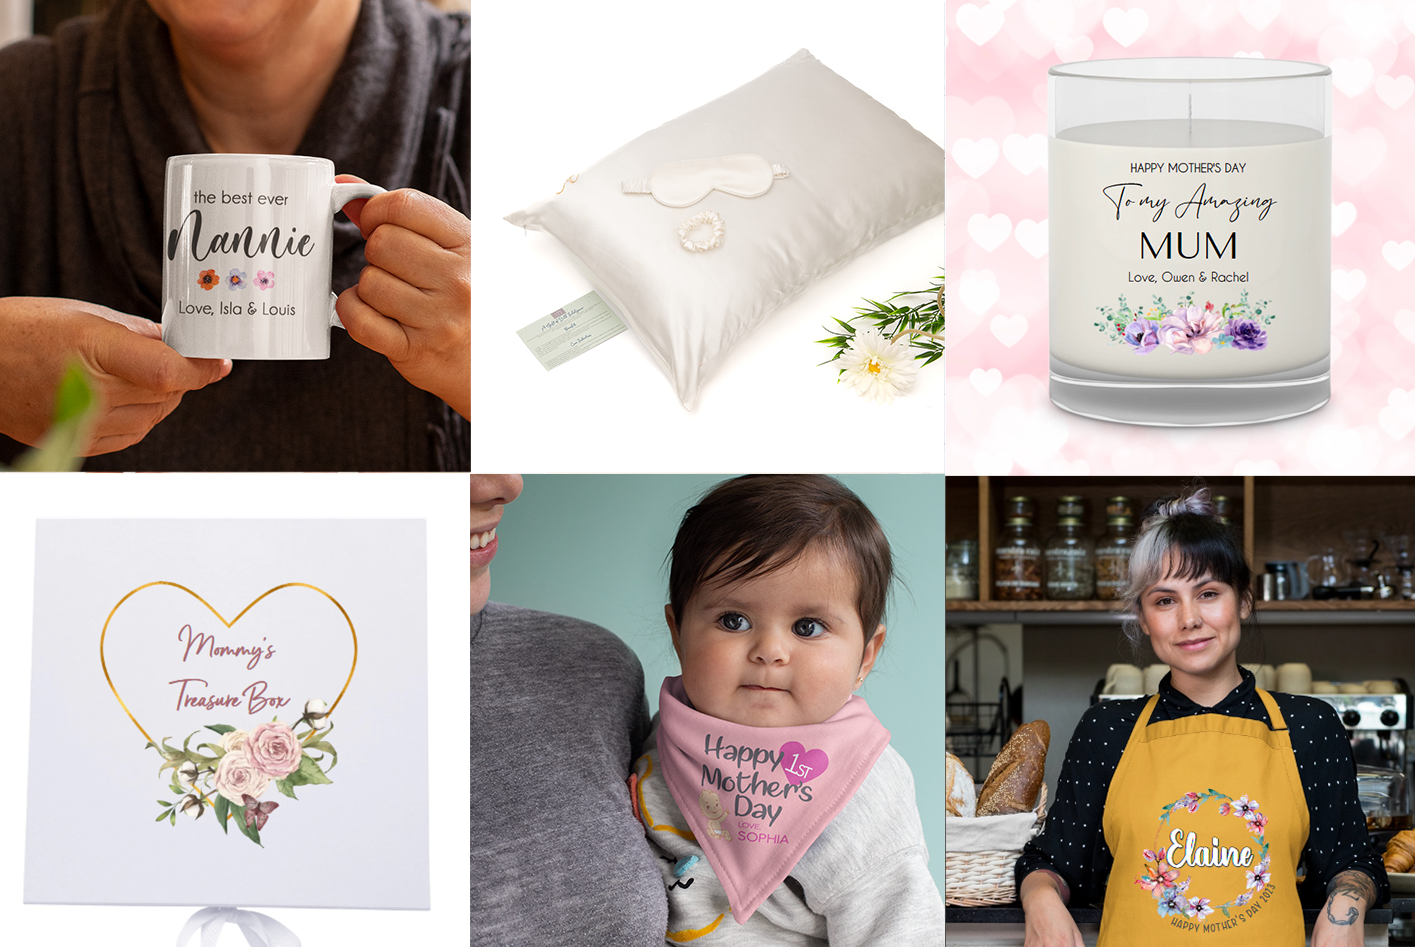 Personalised Gifts to Show Your Love: Celebrating Mother's Day with Heartfelt Surprises